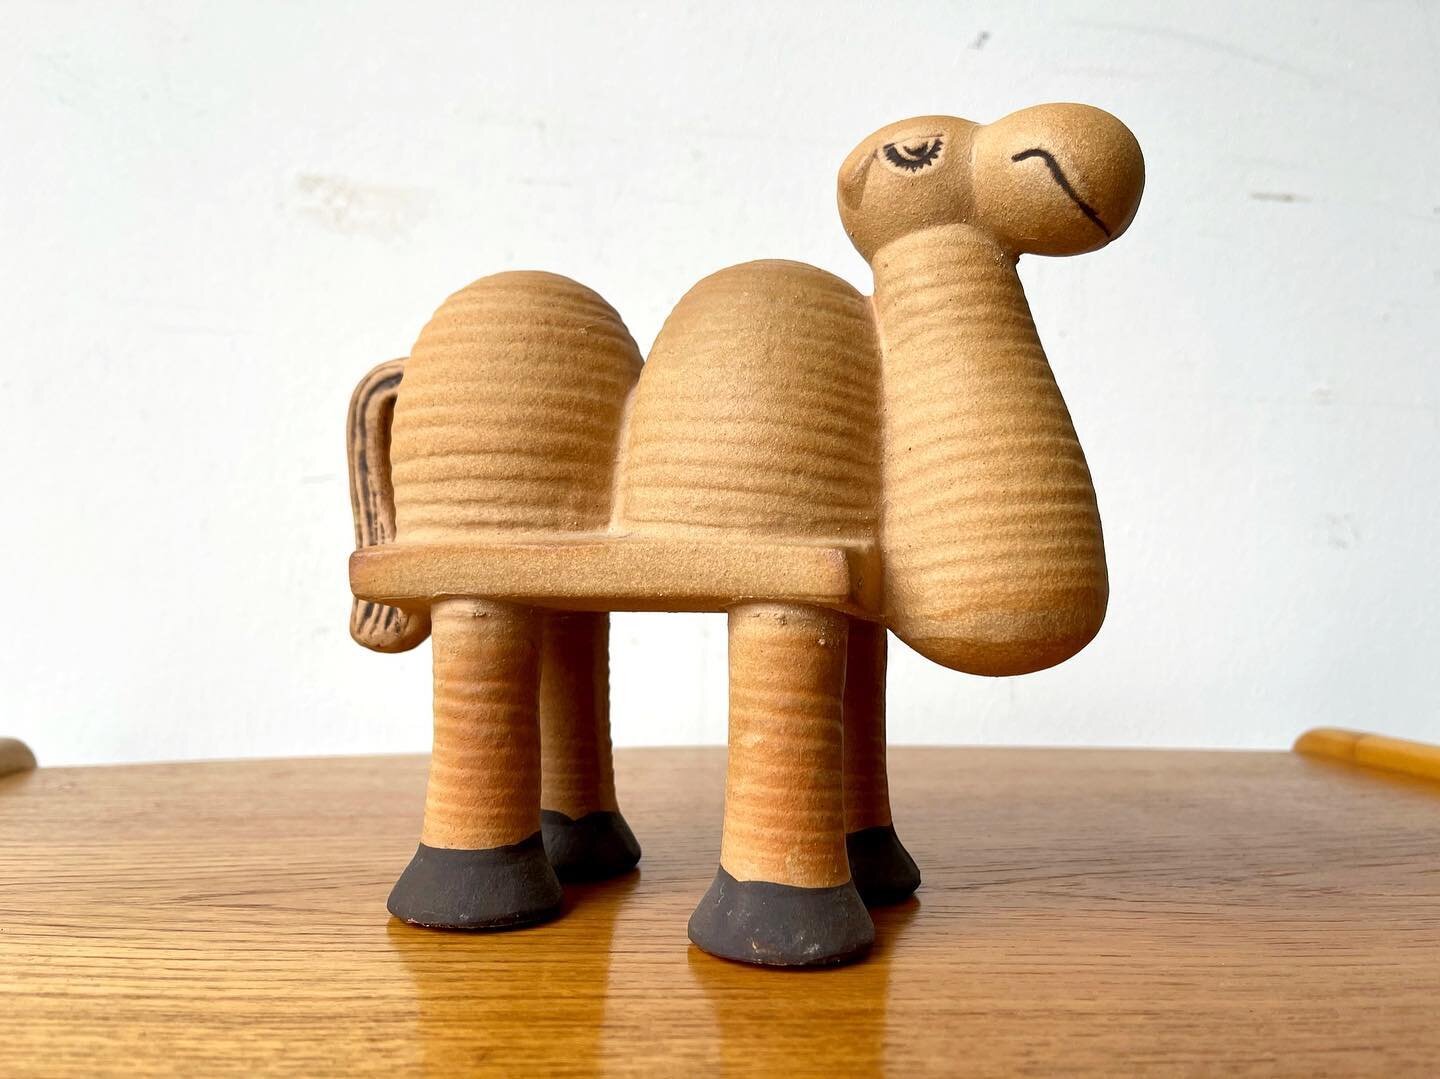 Set Your Alarms - we are having a smalls sale in stories tomorrow at 10AM! An eclectic mix with pottery, planters, brass + kitchenware!

This camel is one of our faves that&rsquo;s coming! 1960&rsquo;s Whimsical Stoneware Camel by Lisa Larson for Gus